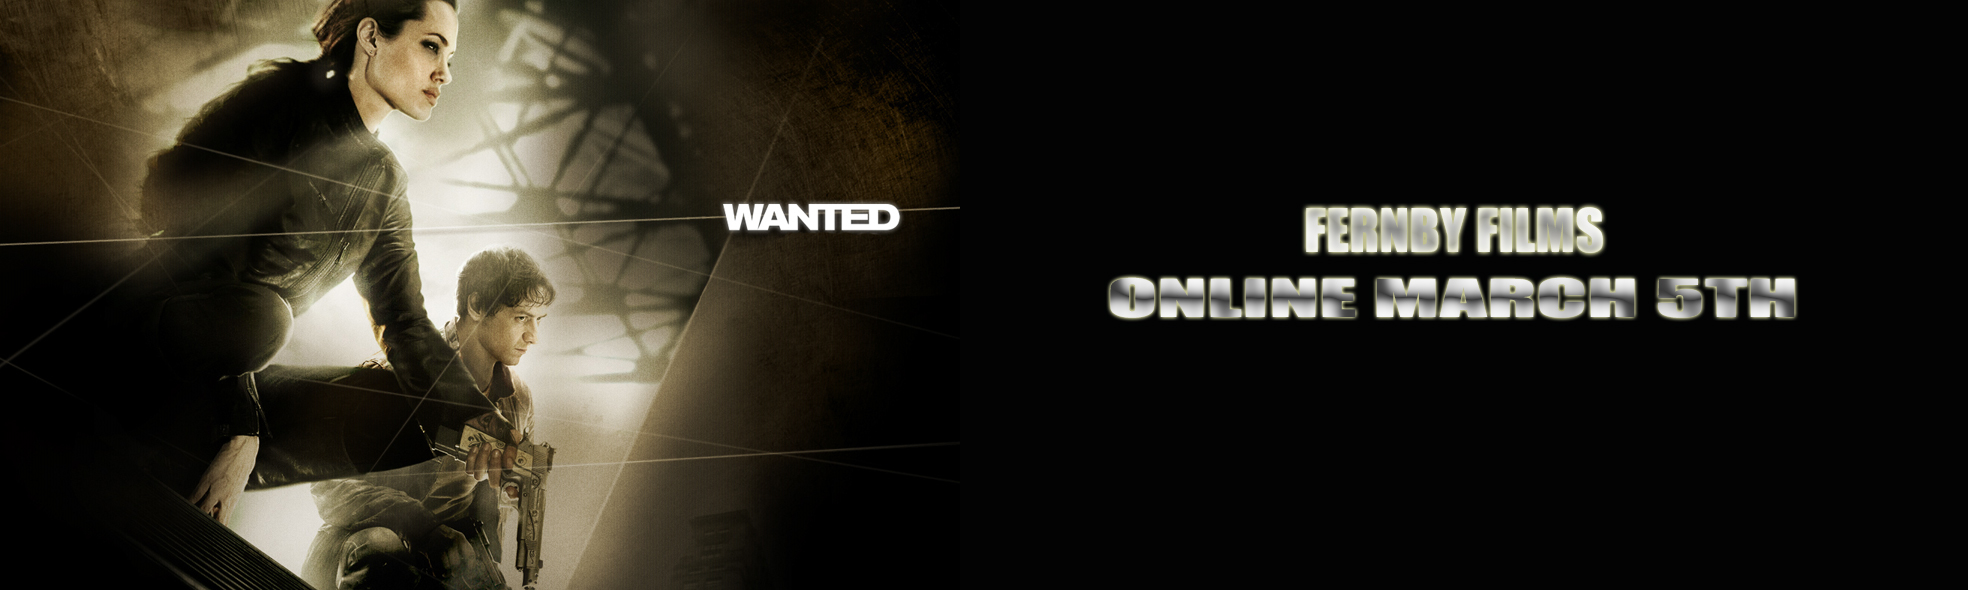 wanted-promo-2